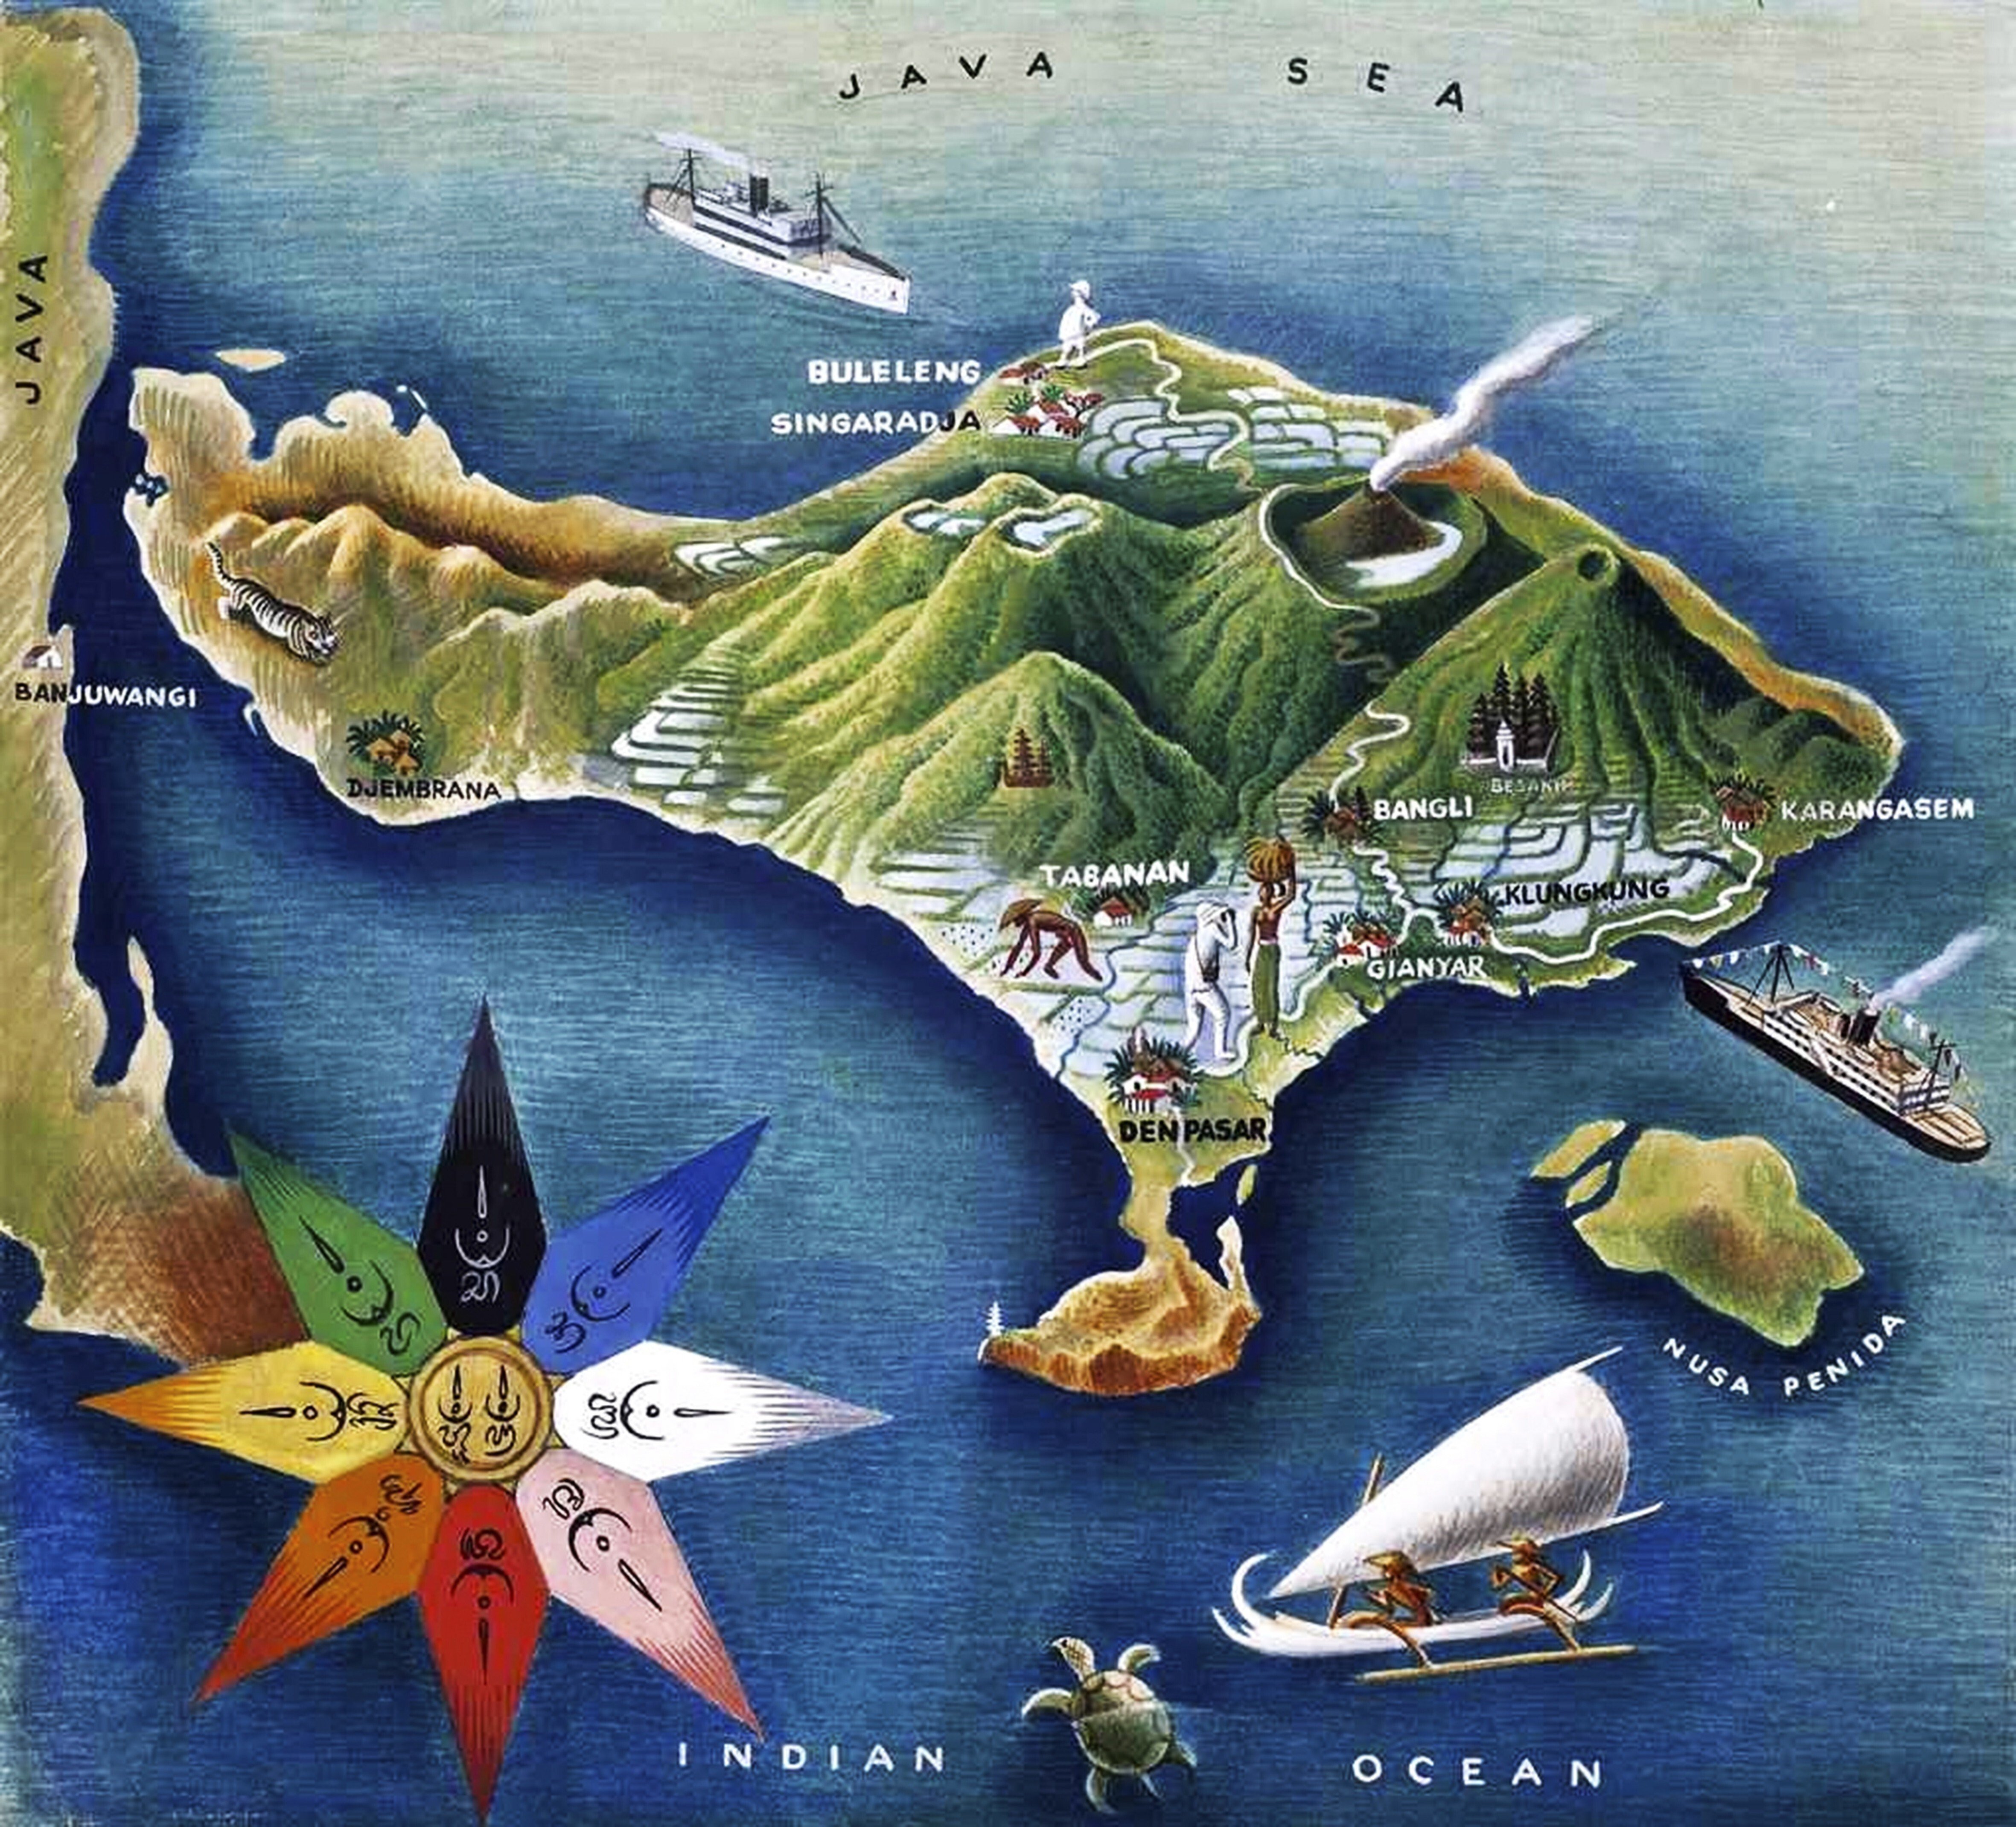 A map of Bali, Indonesia, from the 1930s. Photo: Handout